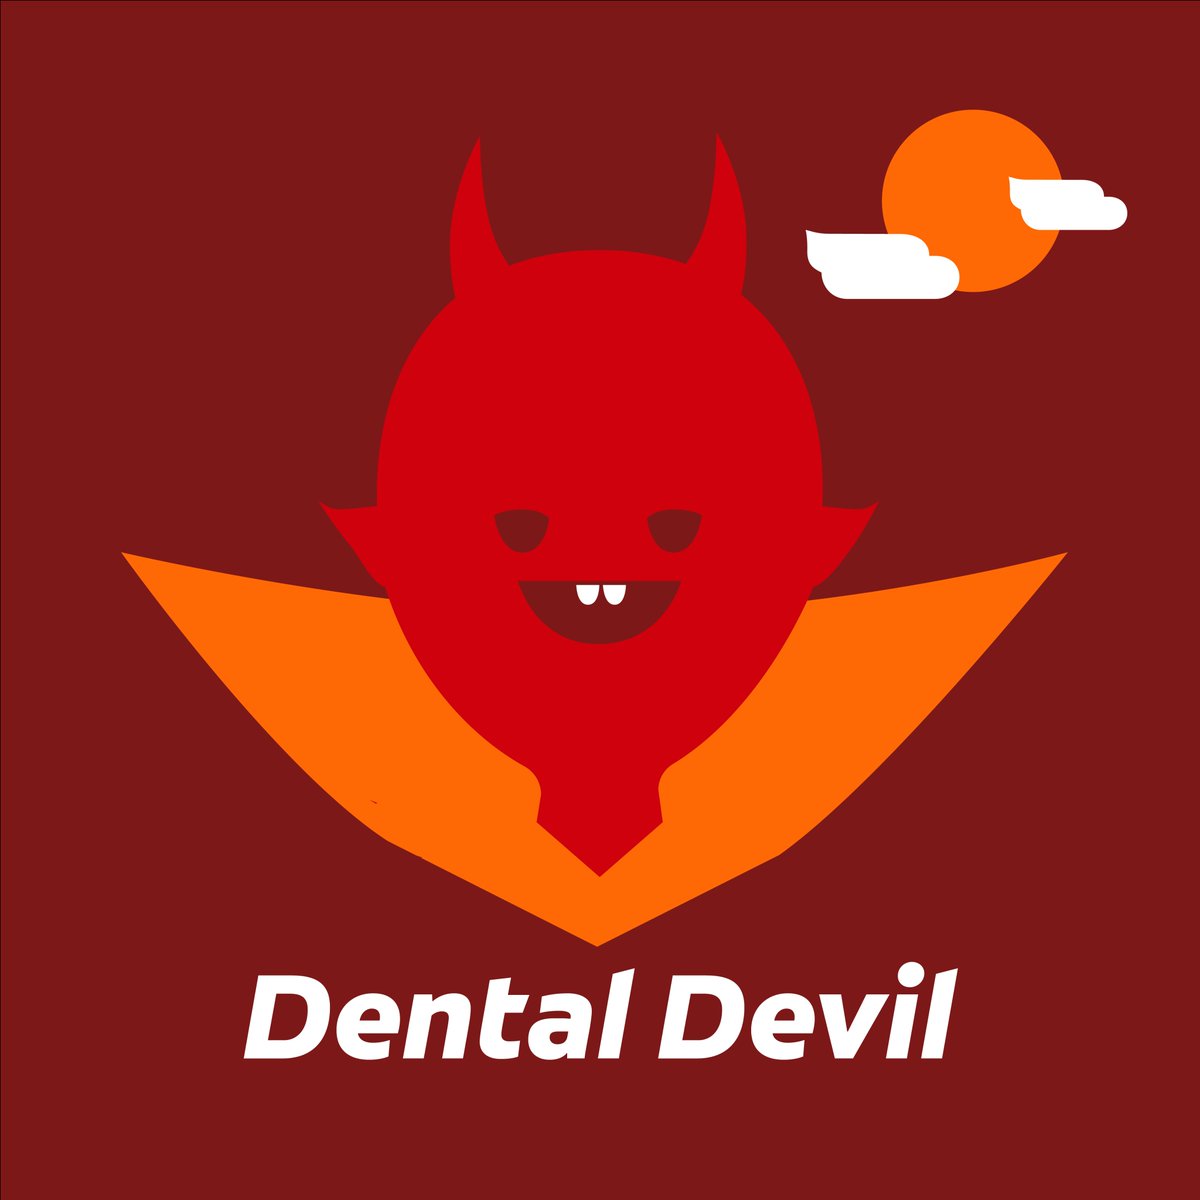 Make a deal with the Dental Devil. 😈🪥 #Halloween